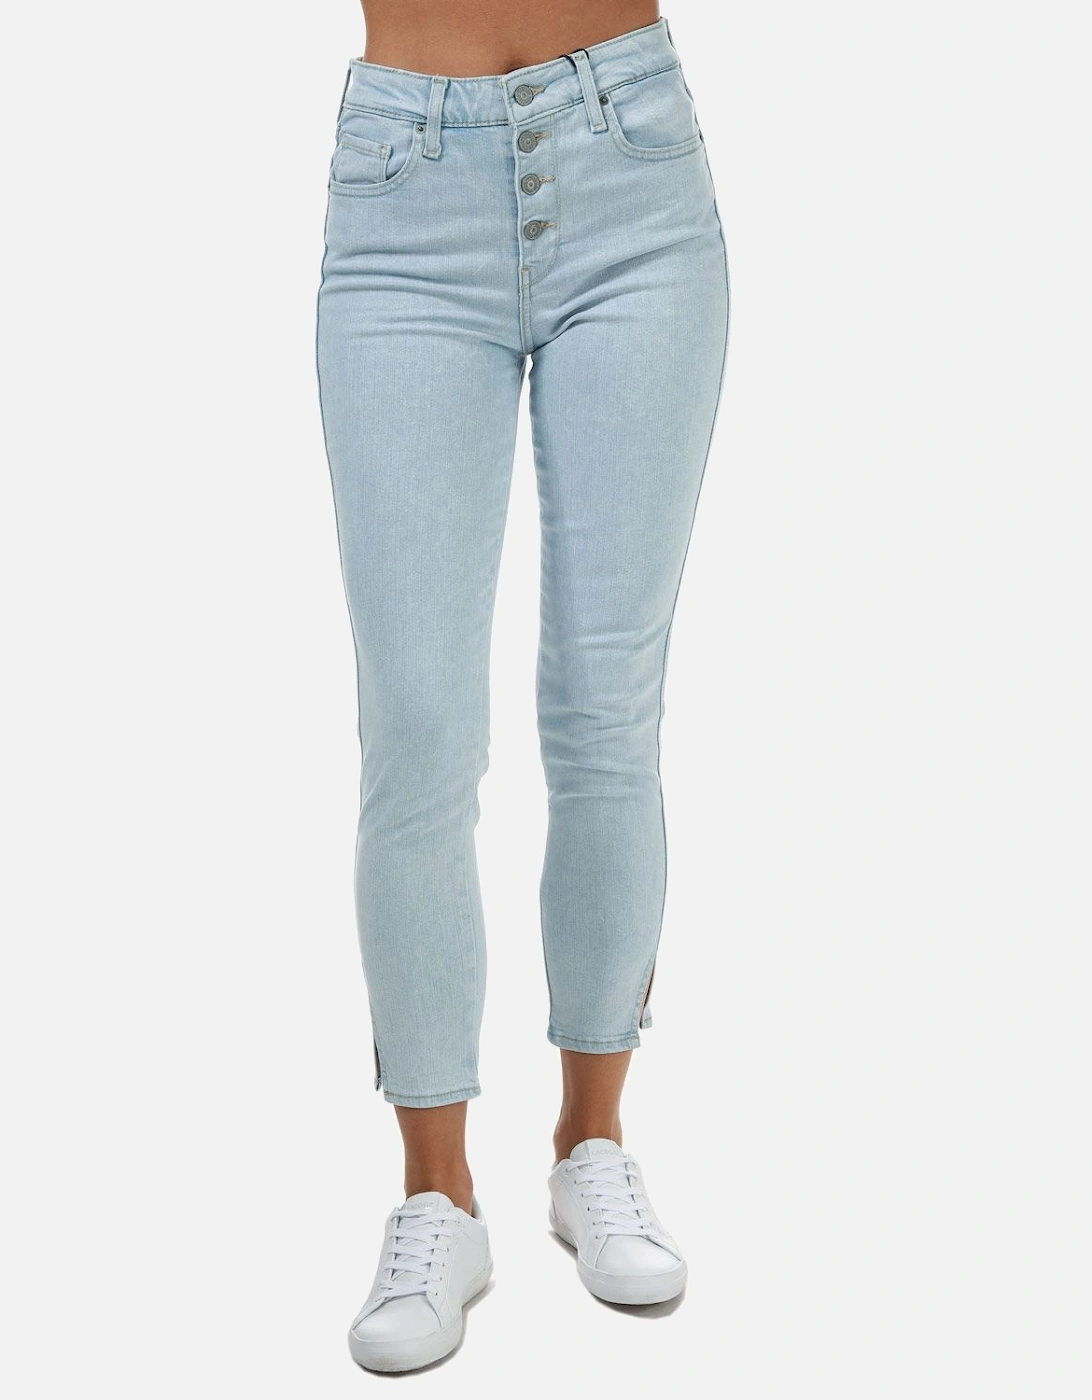 Womens 721 High Rise Skinny Jeans